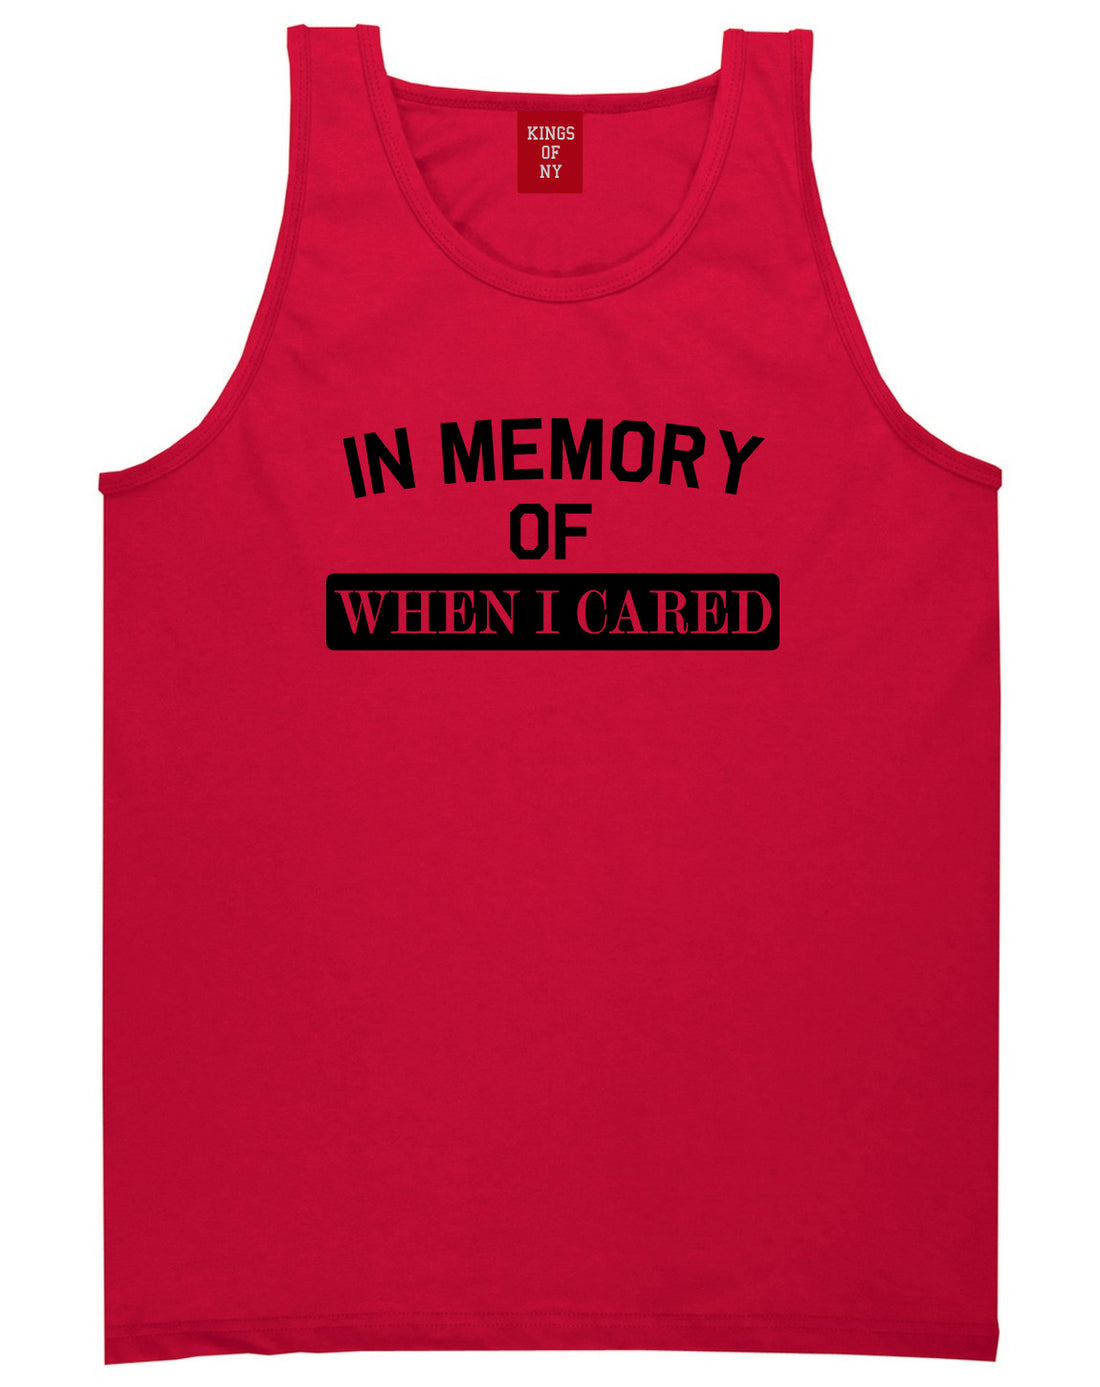 In Memory Of When I Cared Mens Tank Top T-Shirt Red